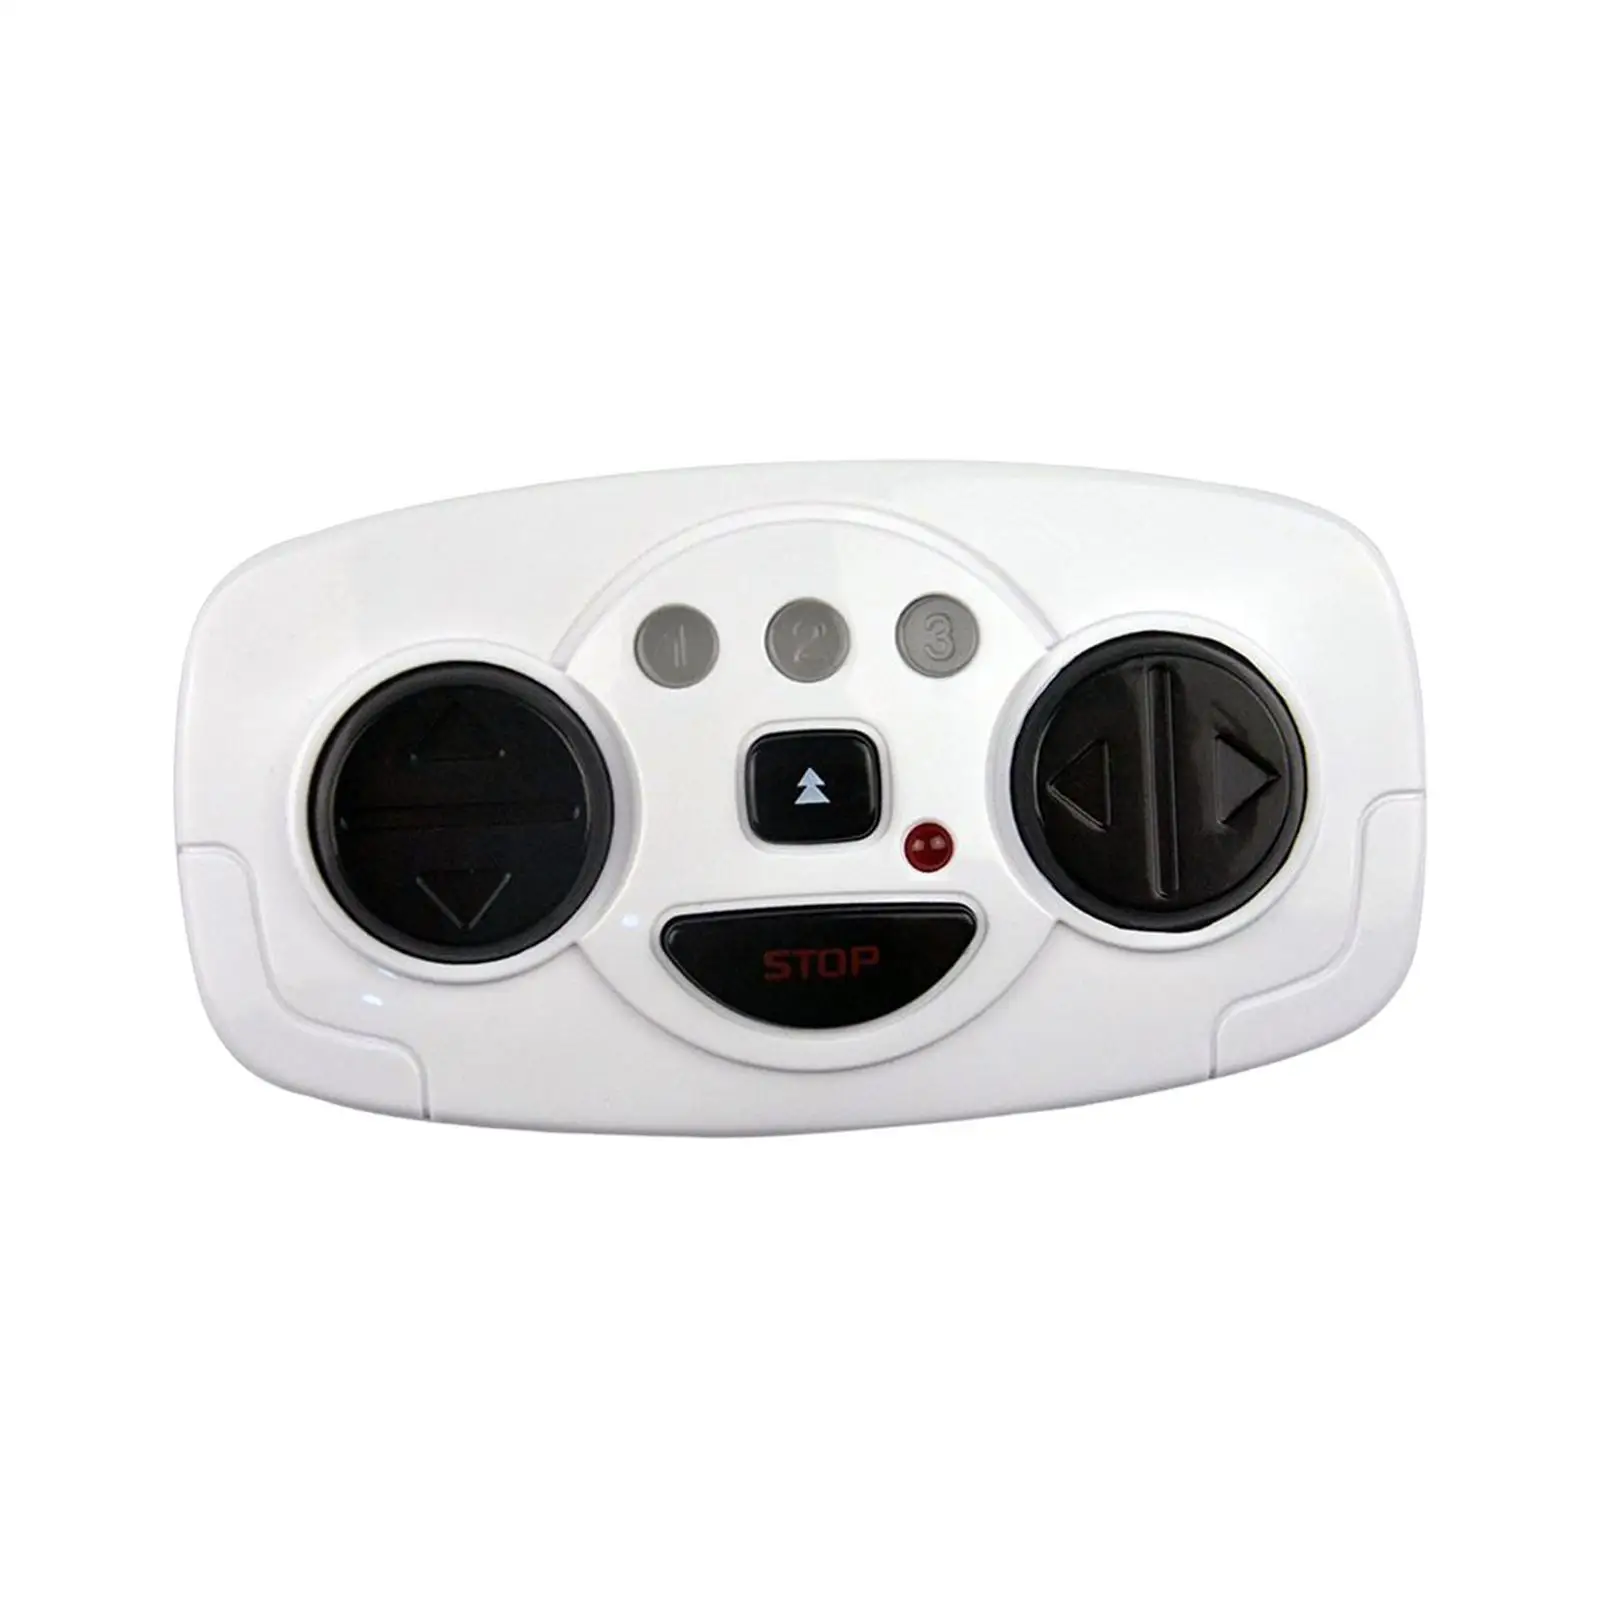 Replacement Remote Controller Repair Parts Accessories for Kids Children